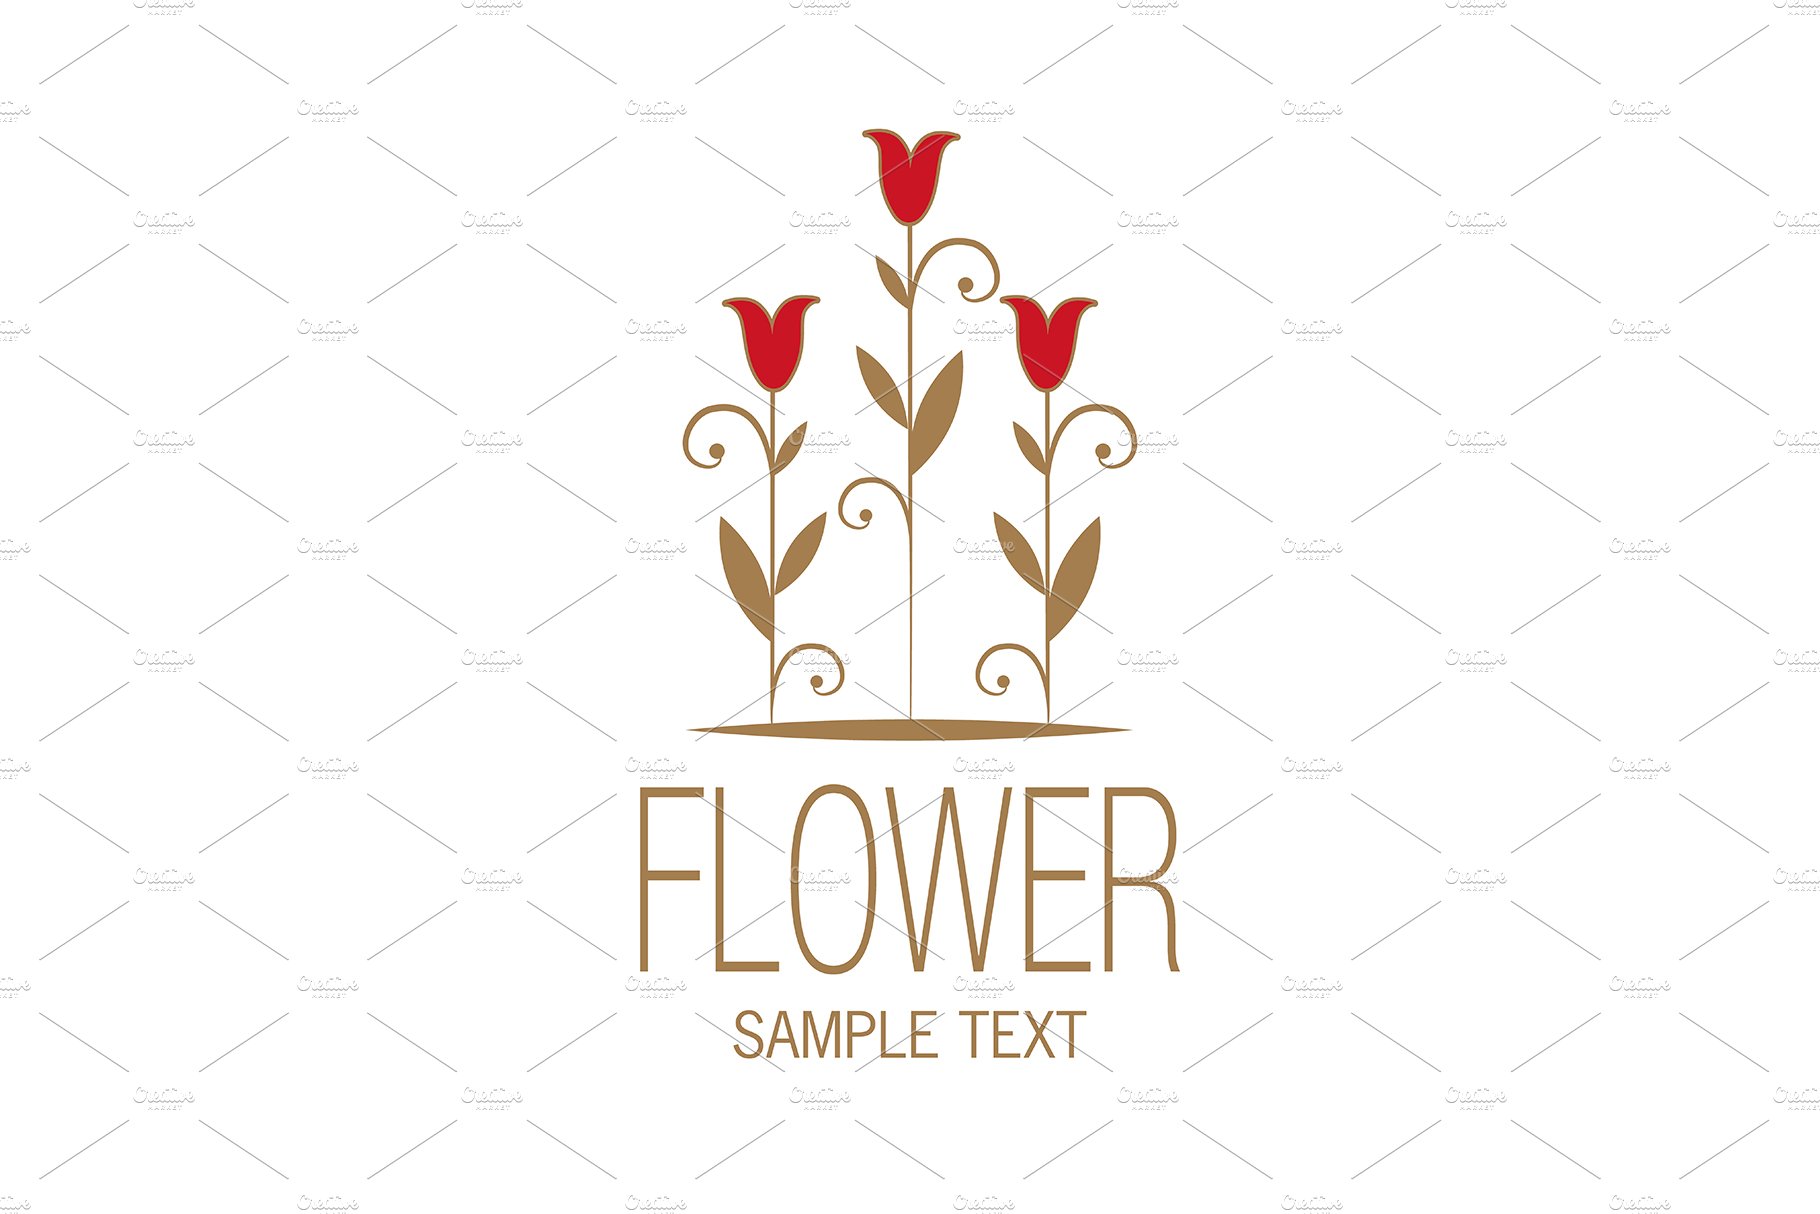 Flower Edition I (Logos) cover image.